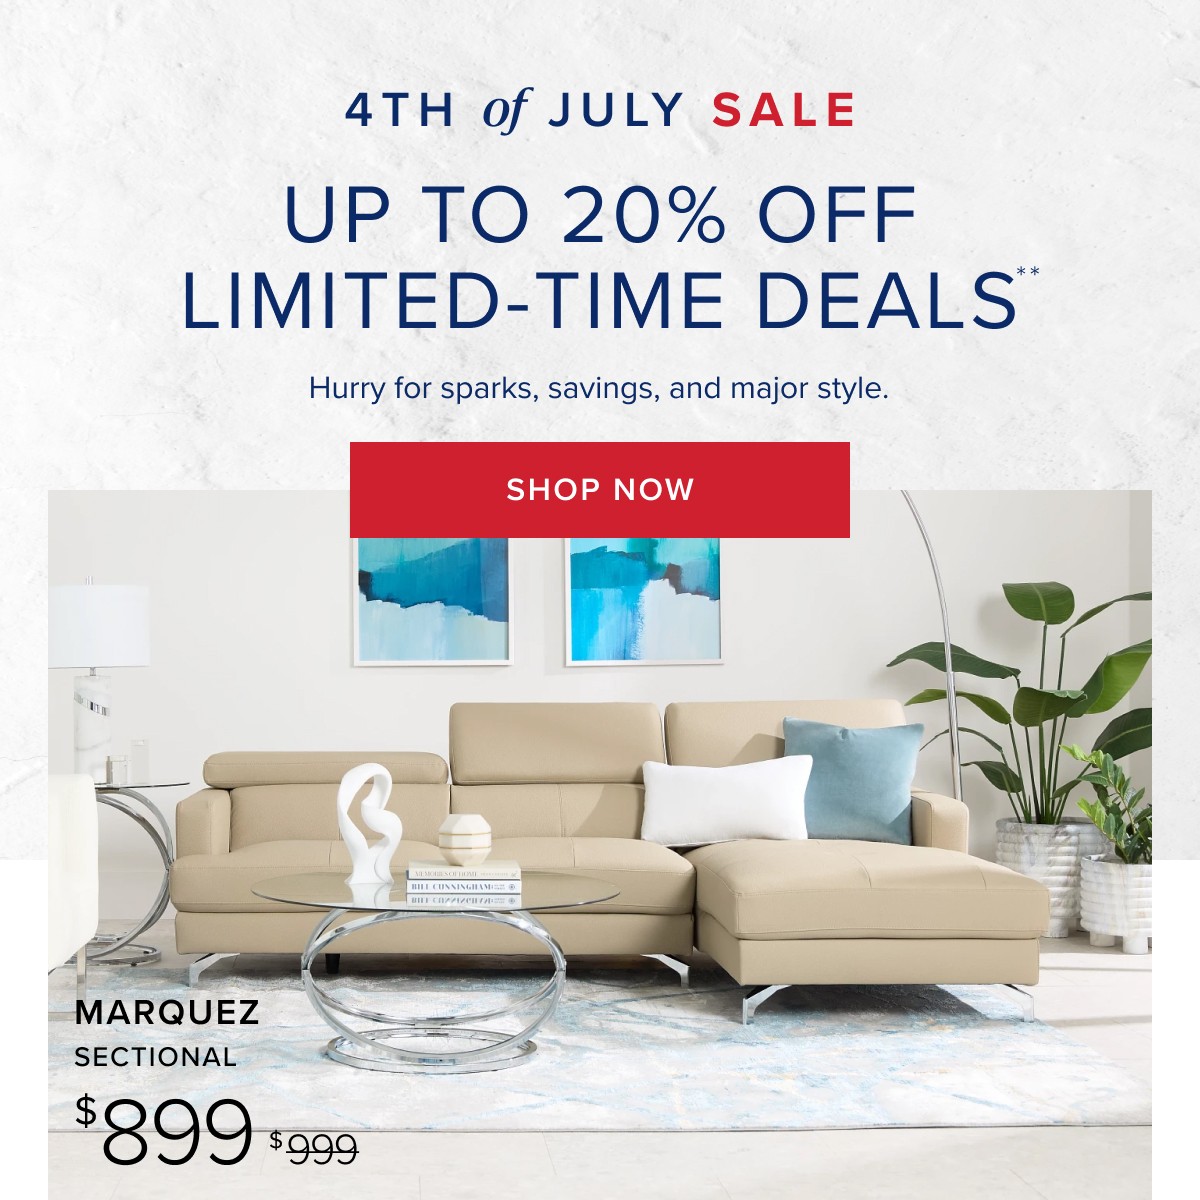 4th of july sale up to 20% off limited-time deals. shop now